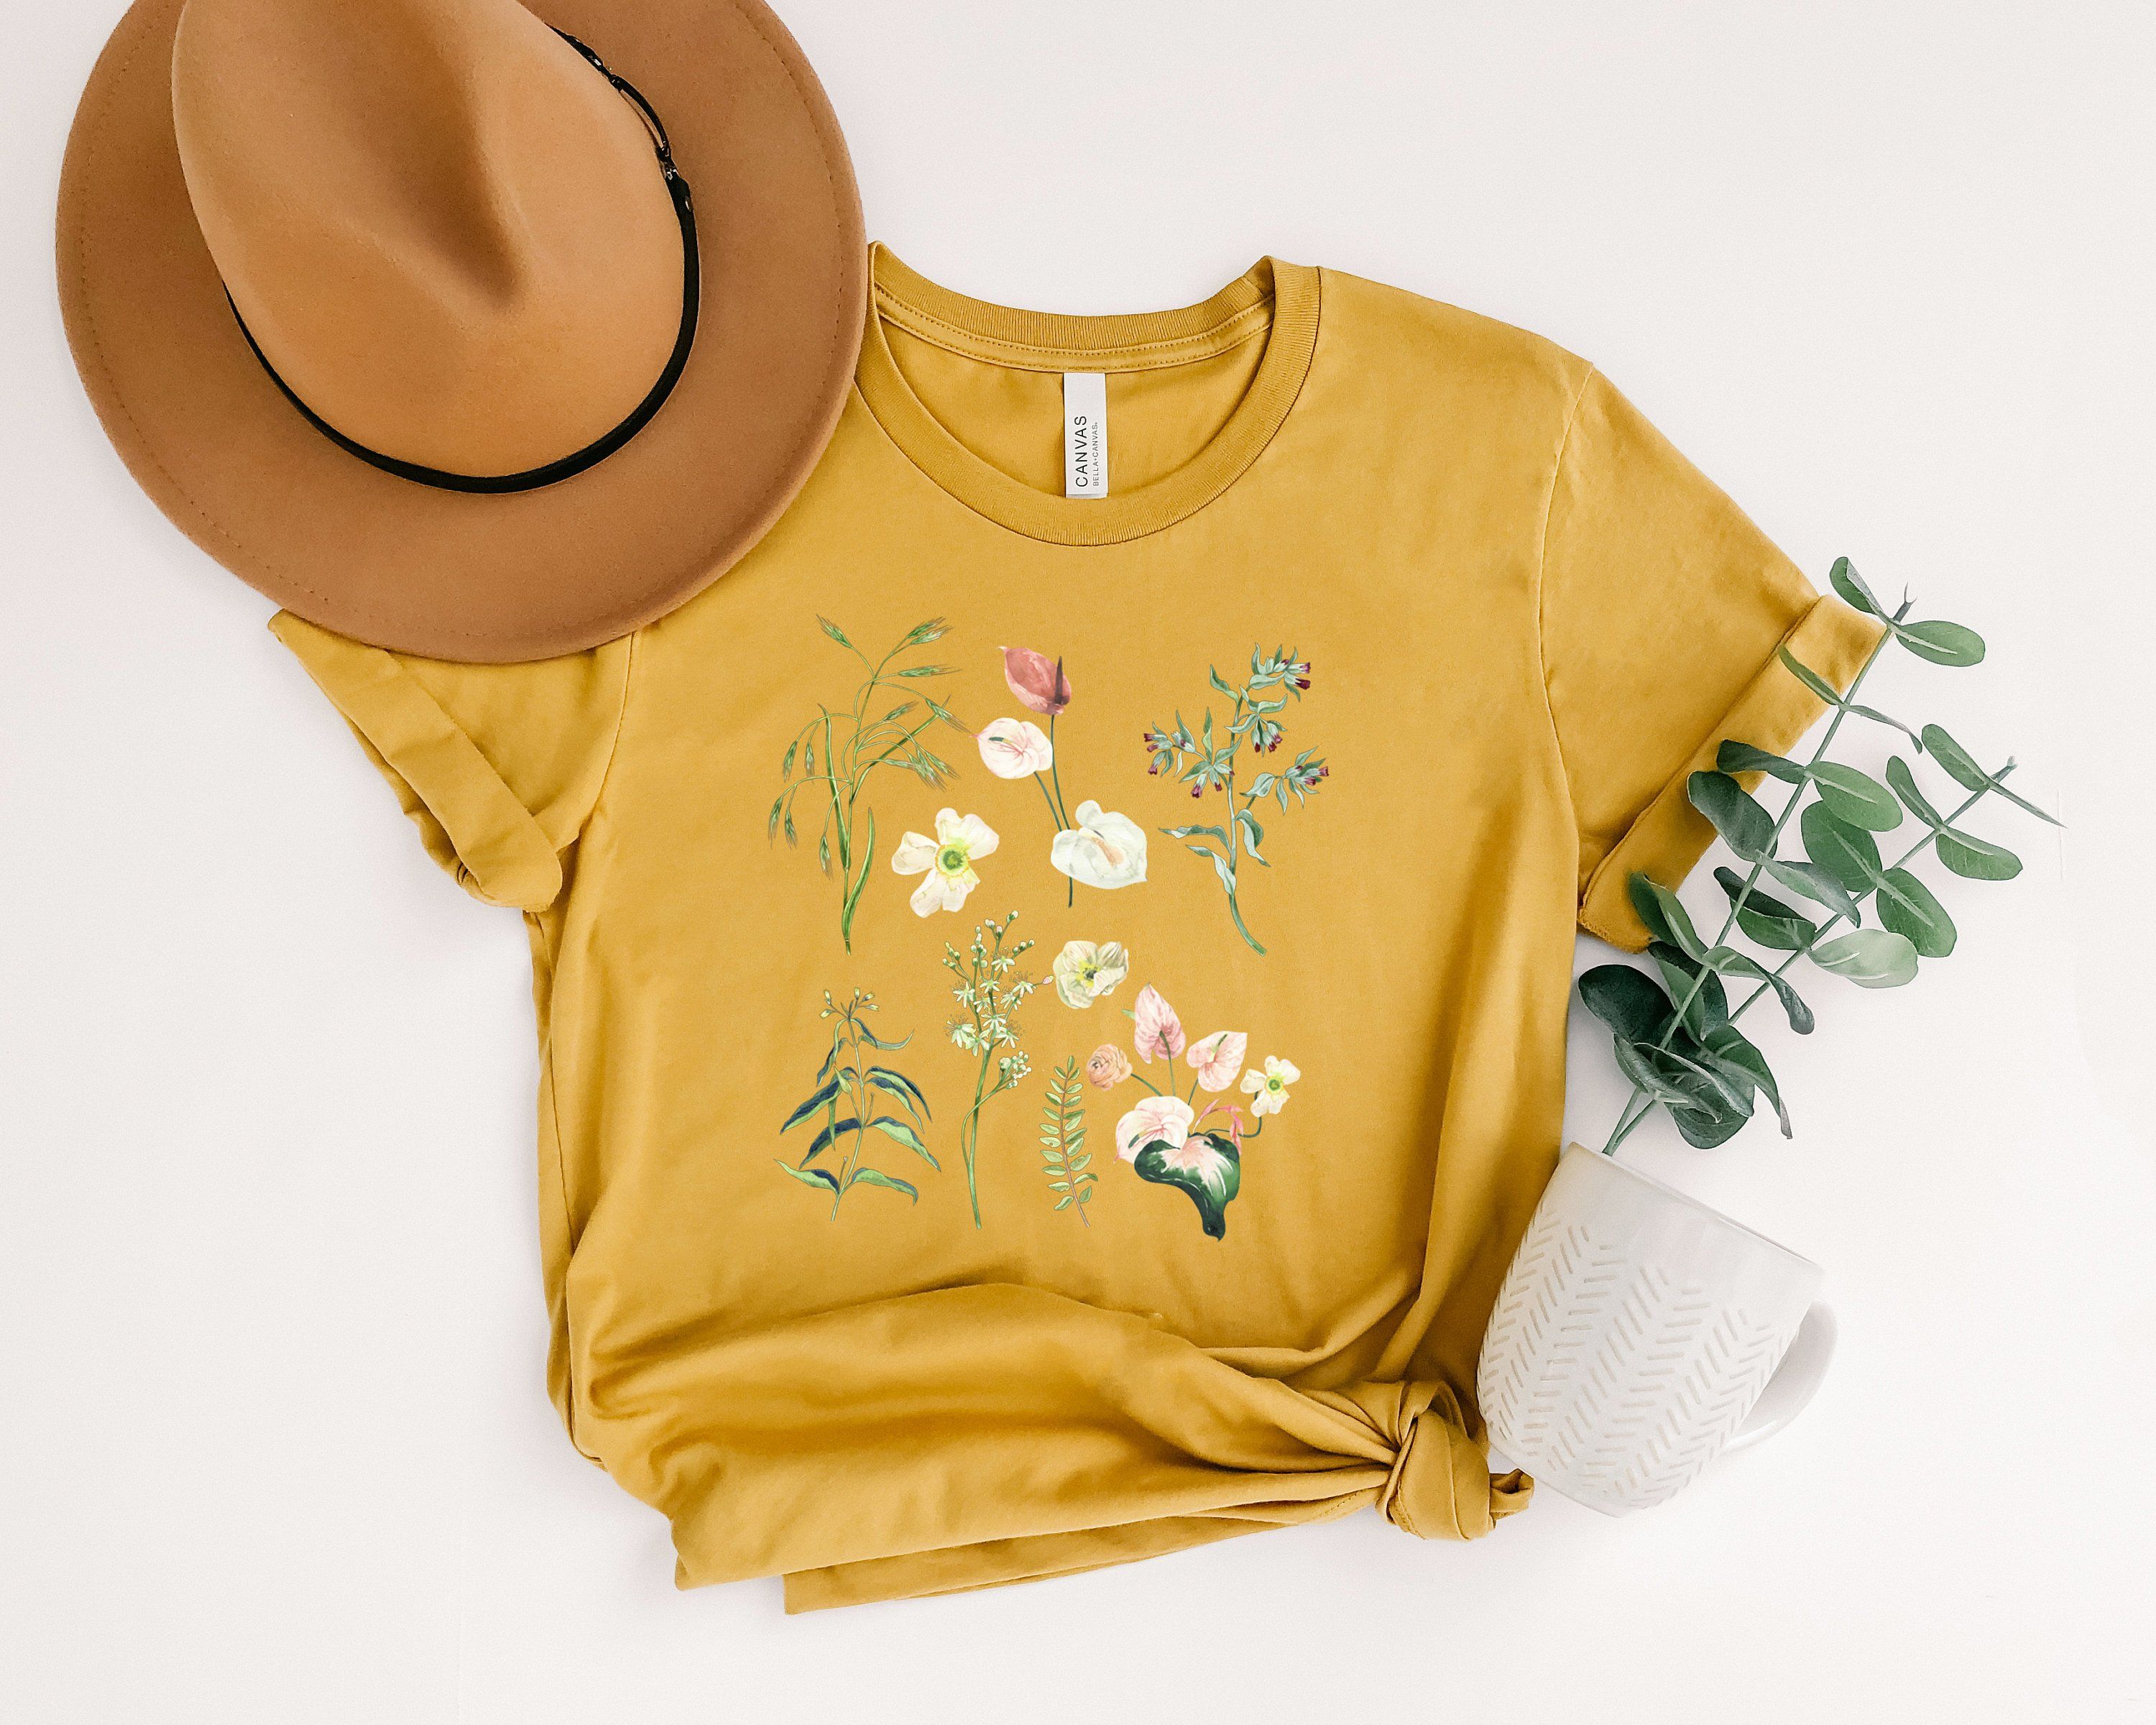 Flower t-shirt, Gift for her, Women trendy tshirt, Spring concept, Wild meadow flower nature tee